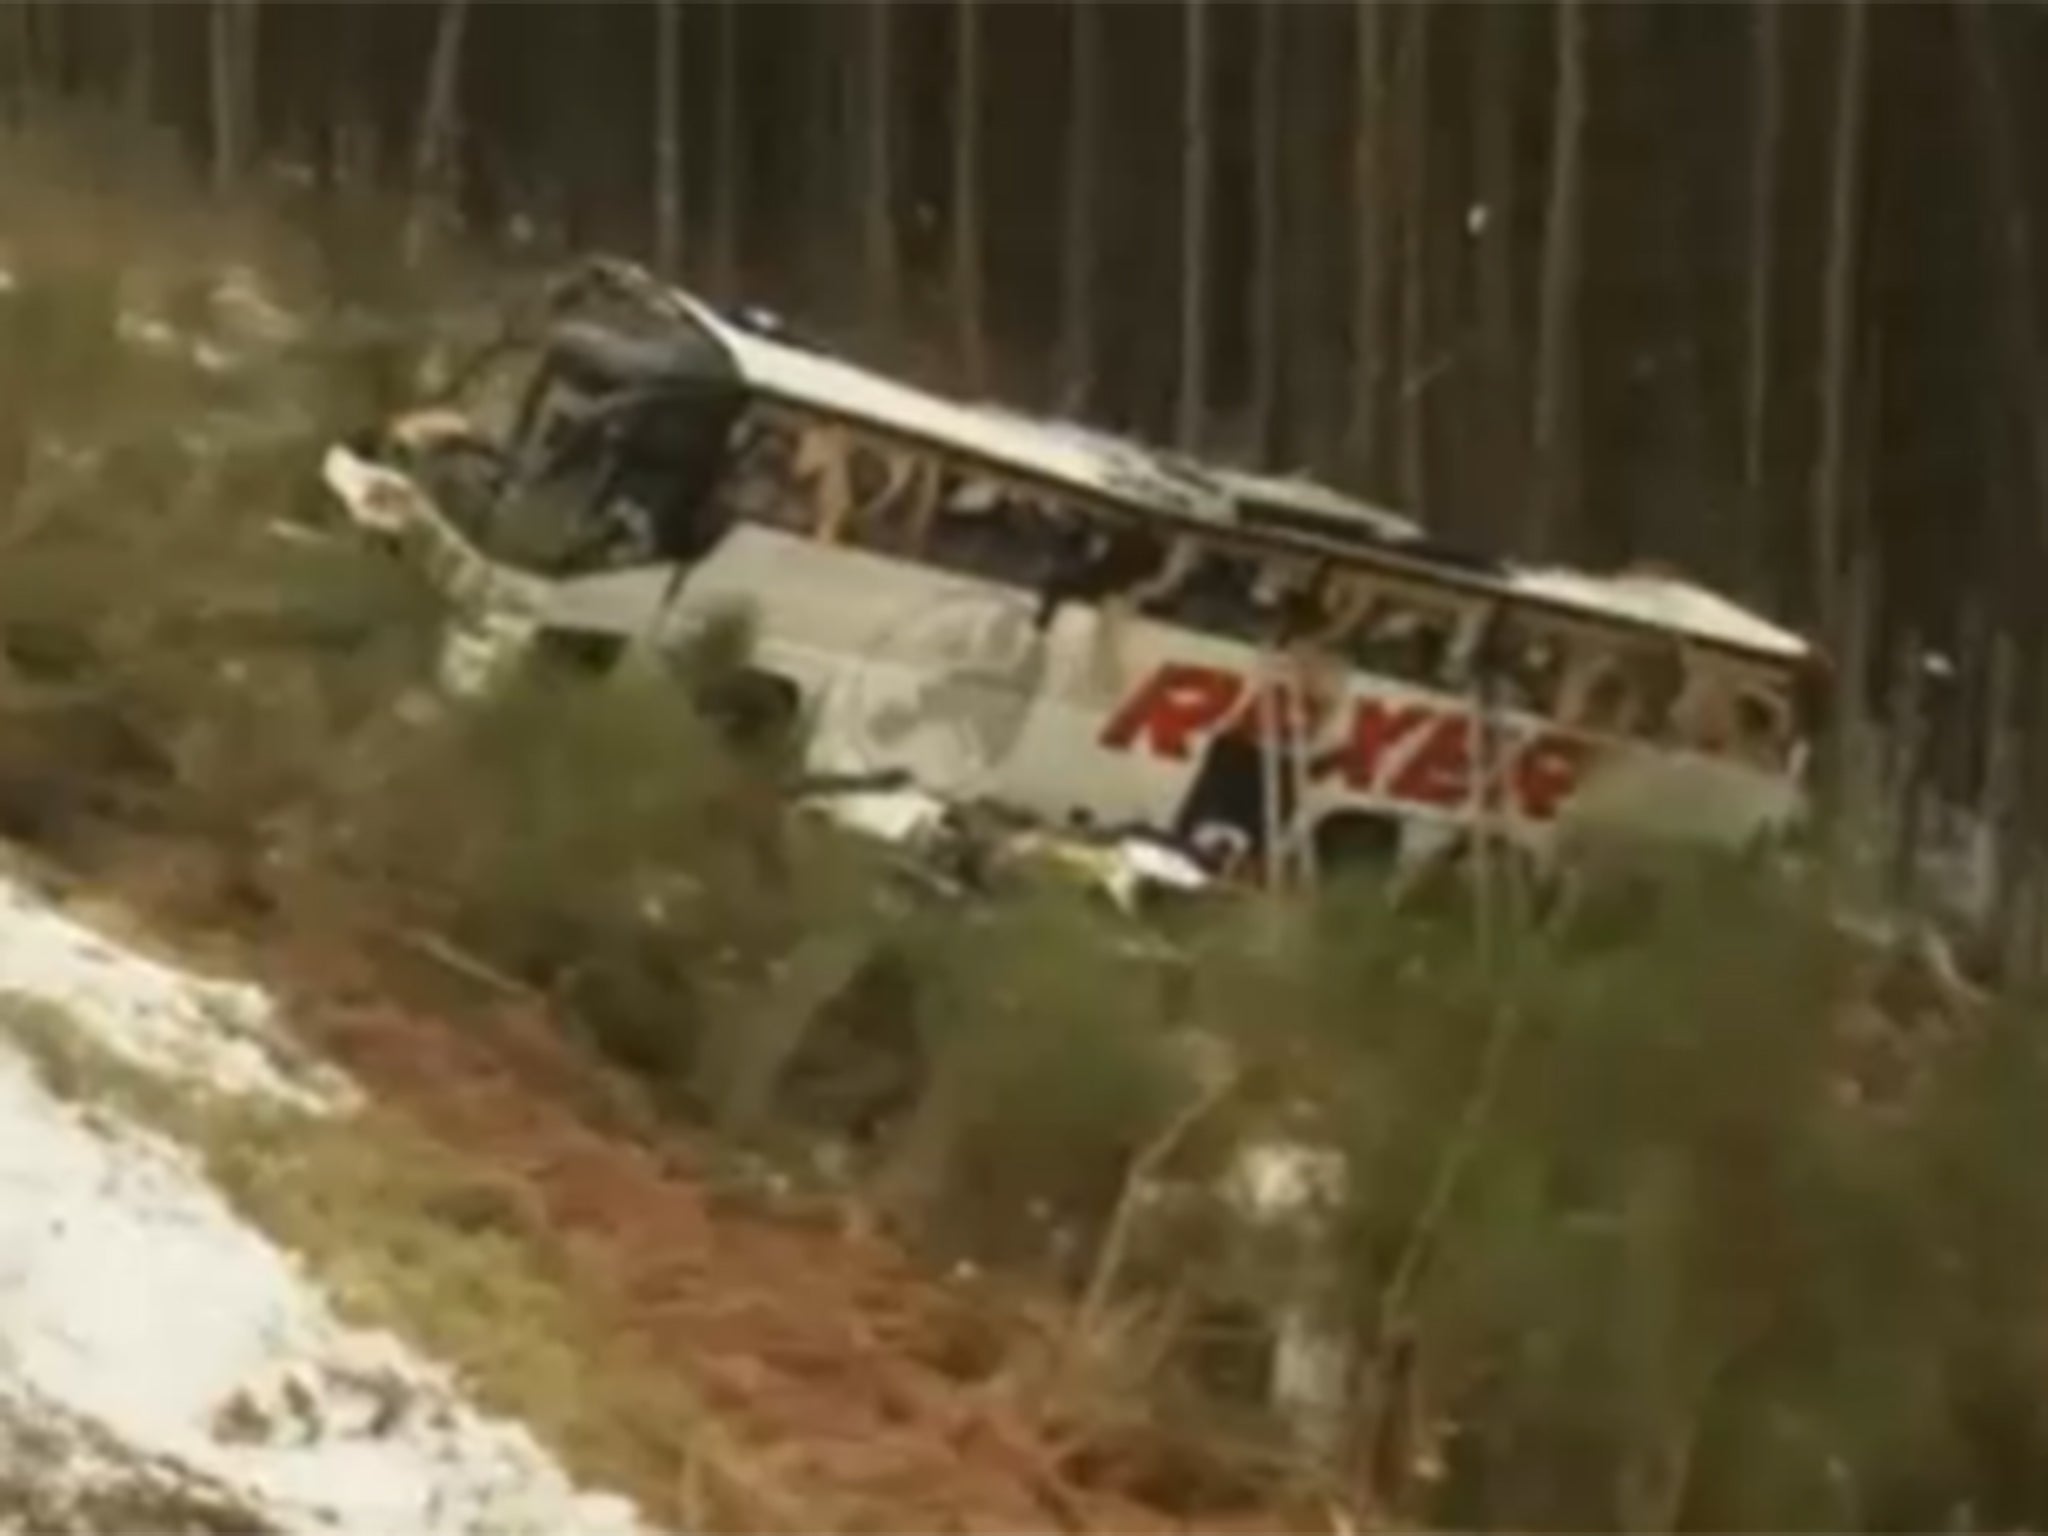 The bus lies by the side of the road after the crash